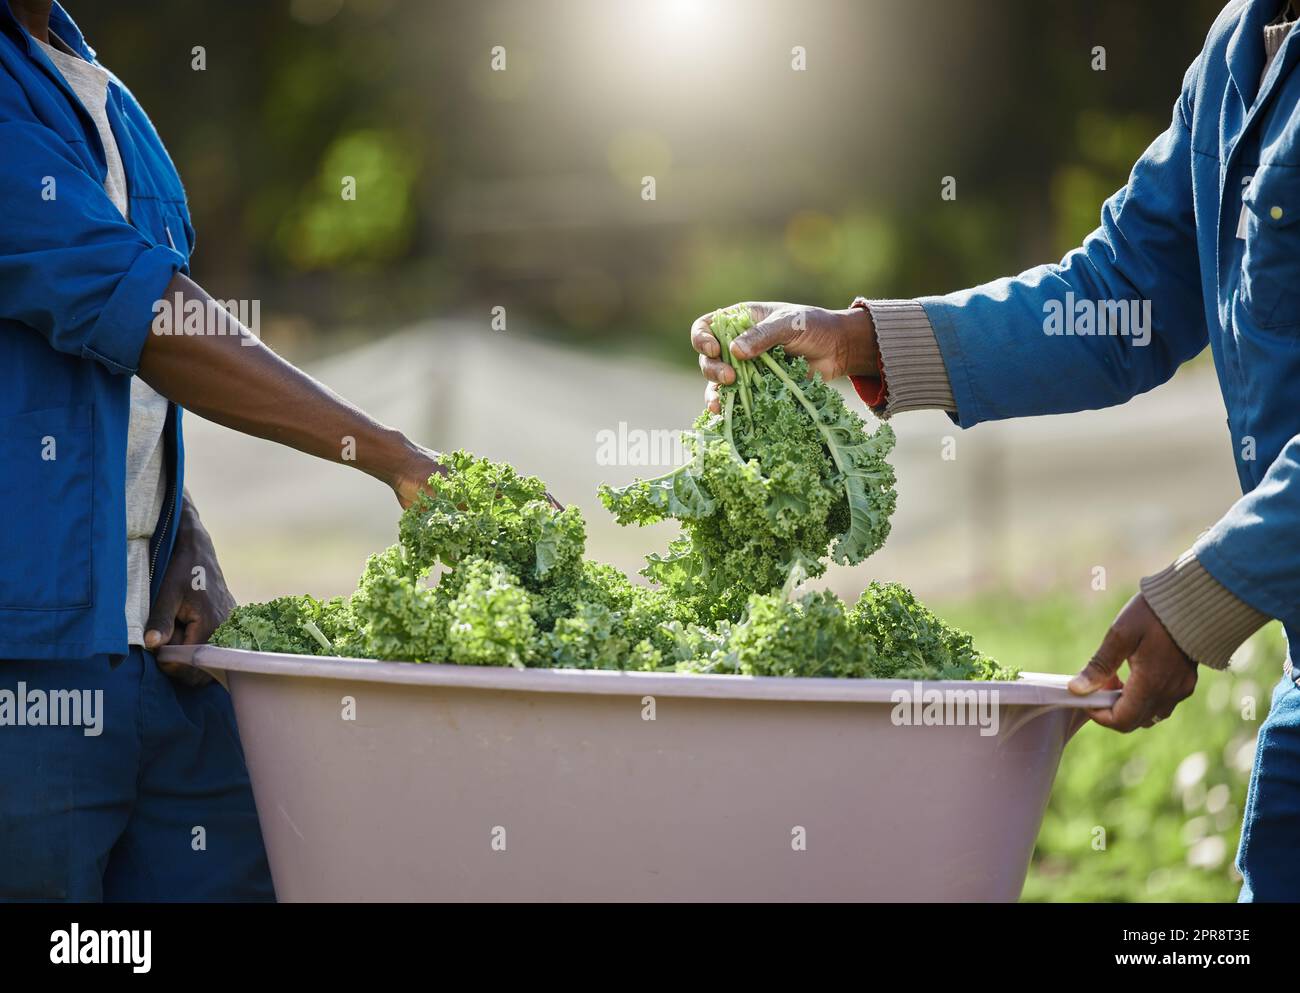 Picking only the best. two unrecognizable male farm workers tending to the crops. Stock Photo